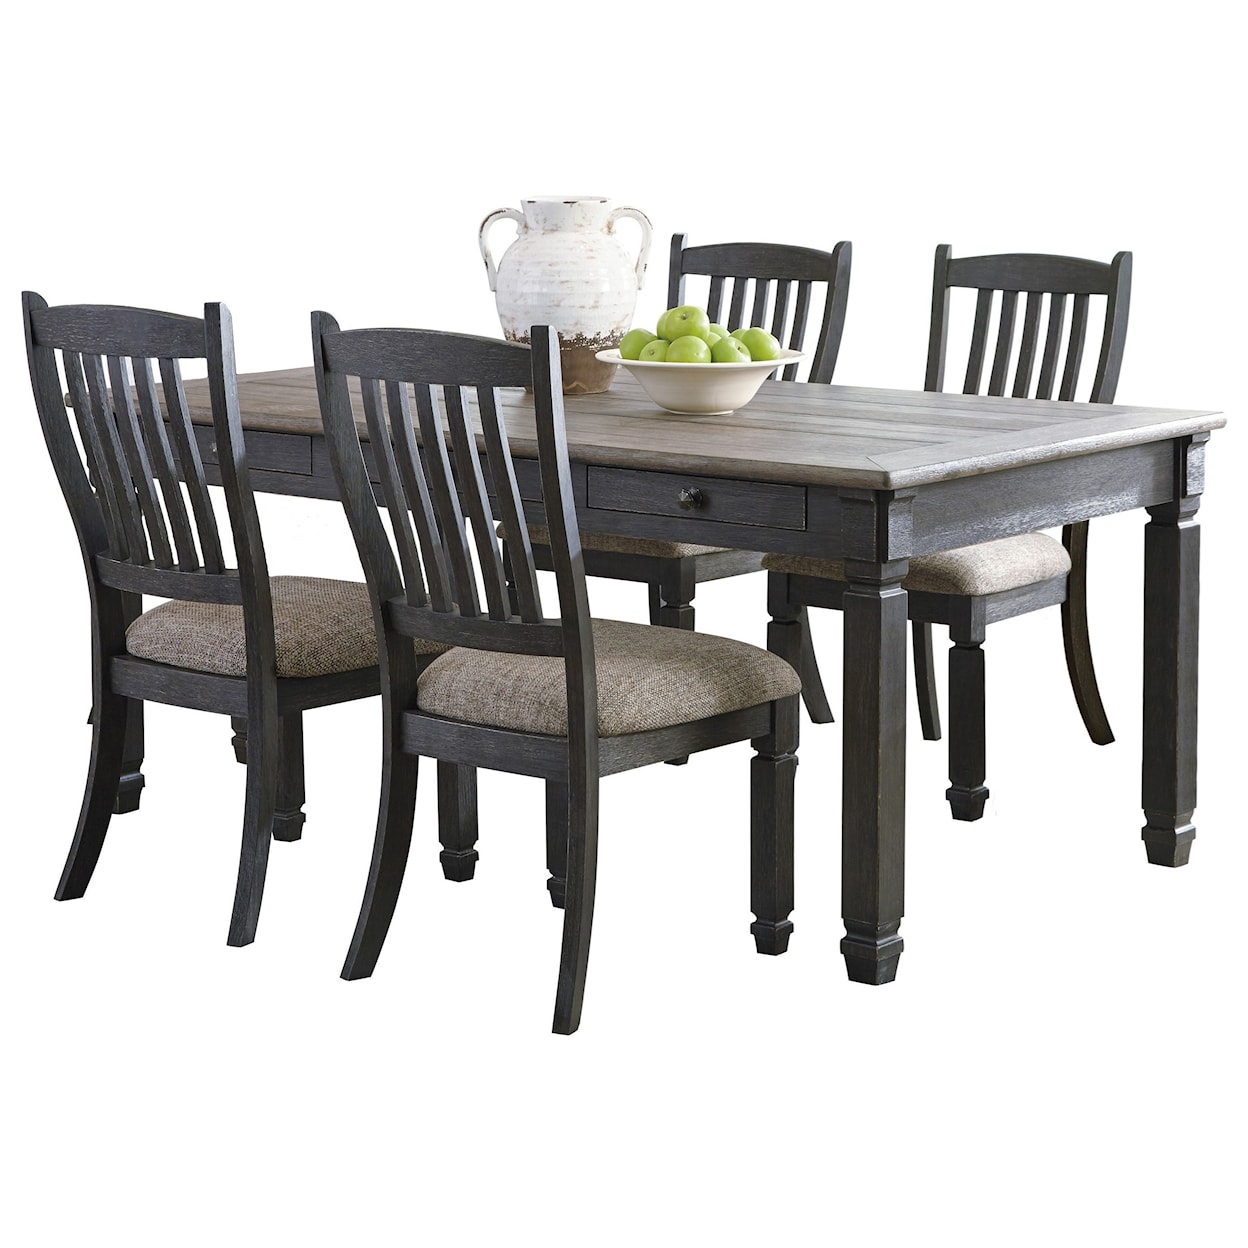 Signature Design by Ashley Tyler Creek 5-Piece Table and Chair Set